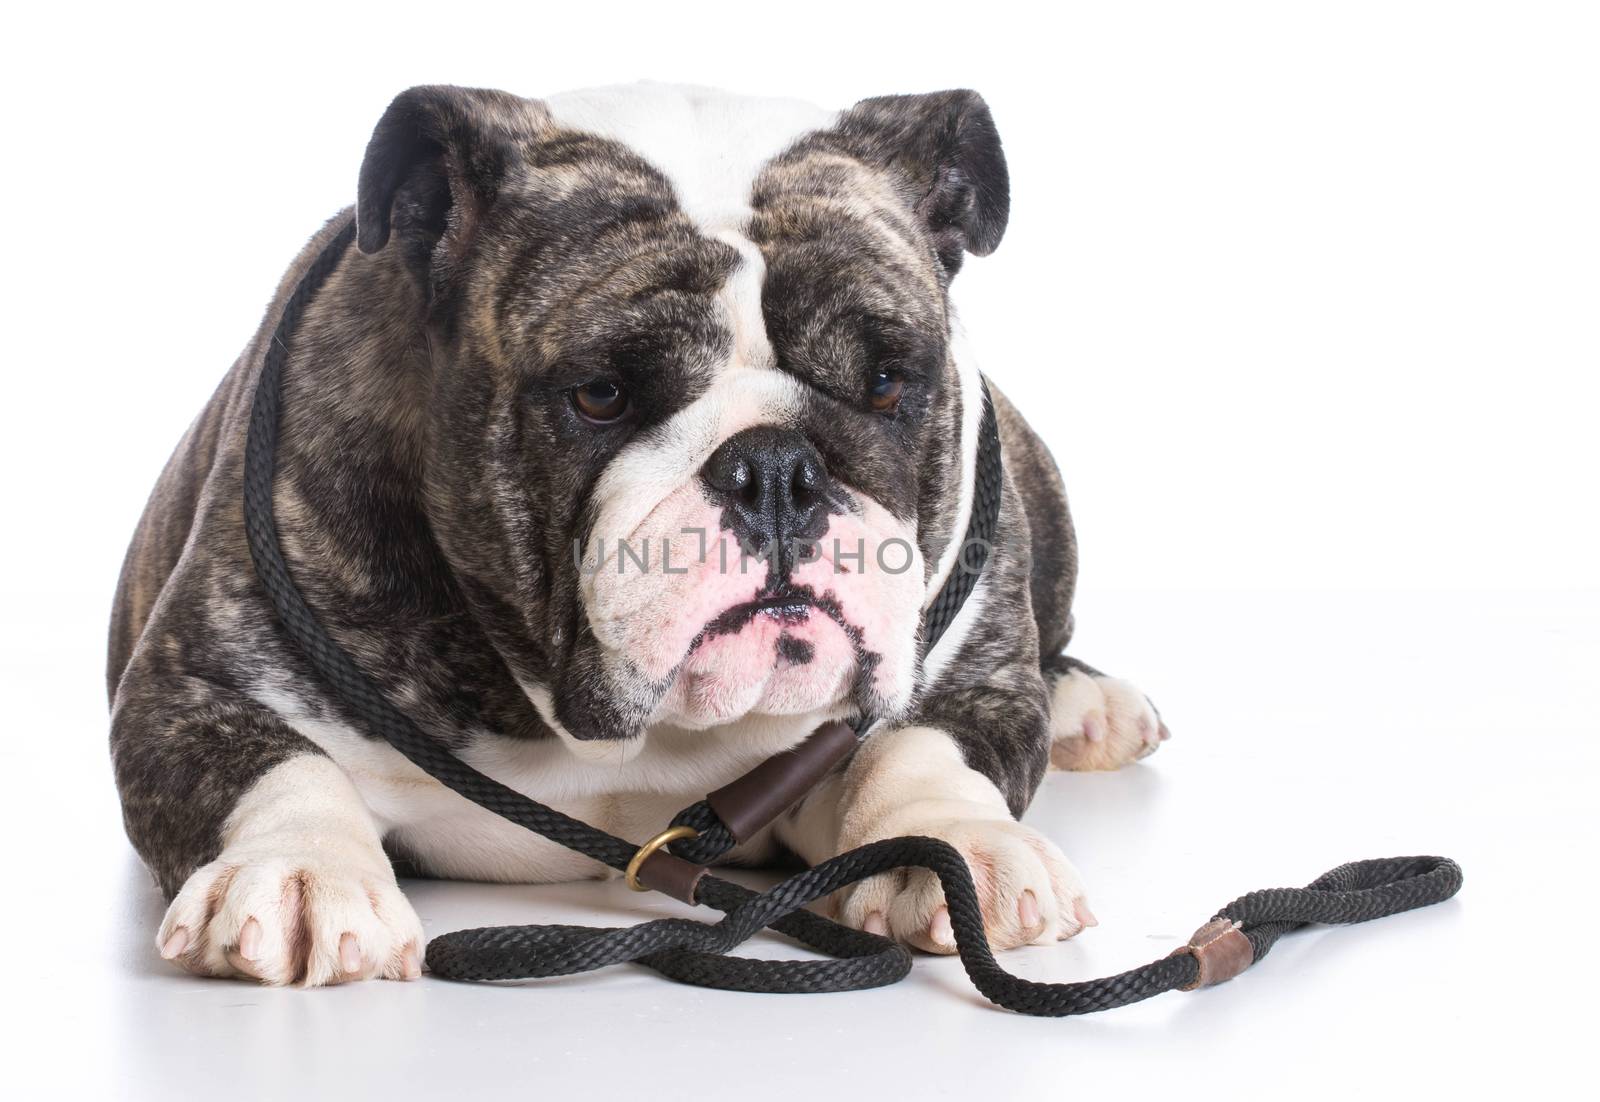 dog on a leash - bulldog wearing a slip lead laying down on white background